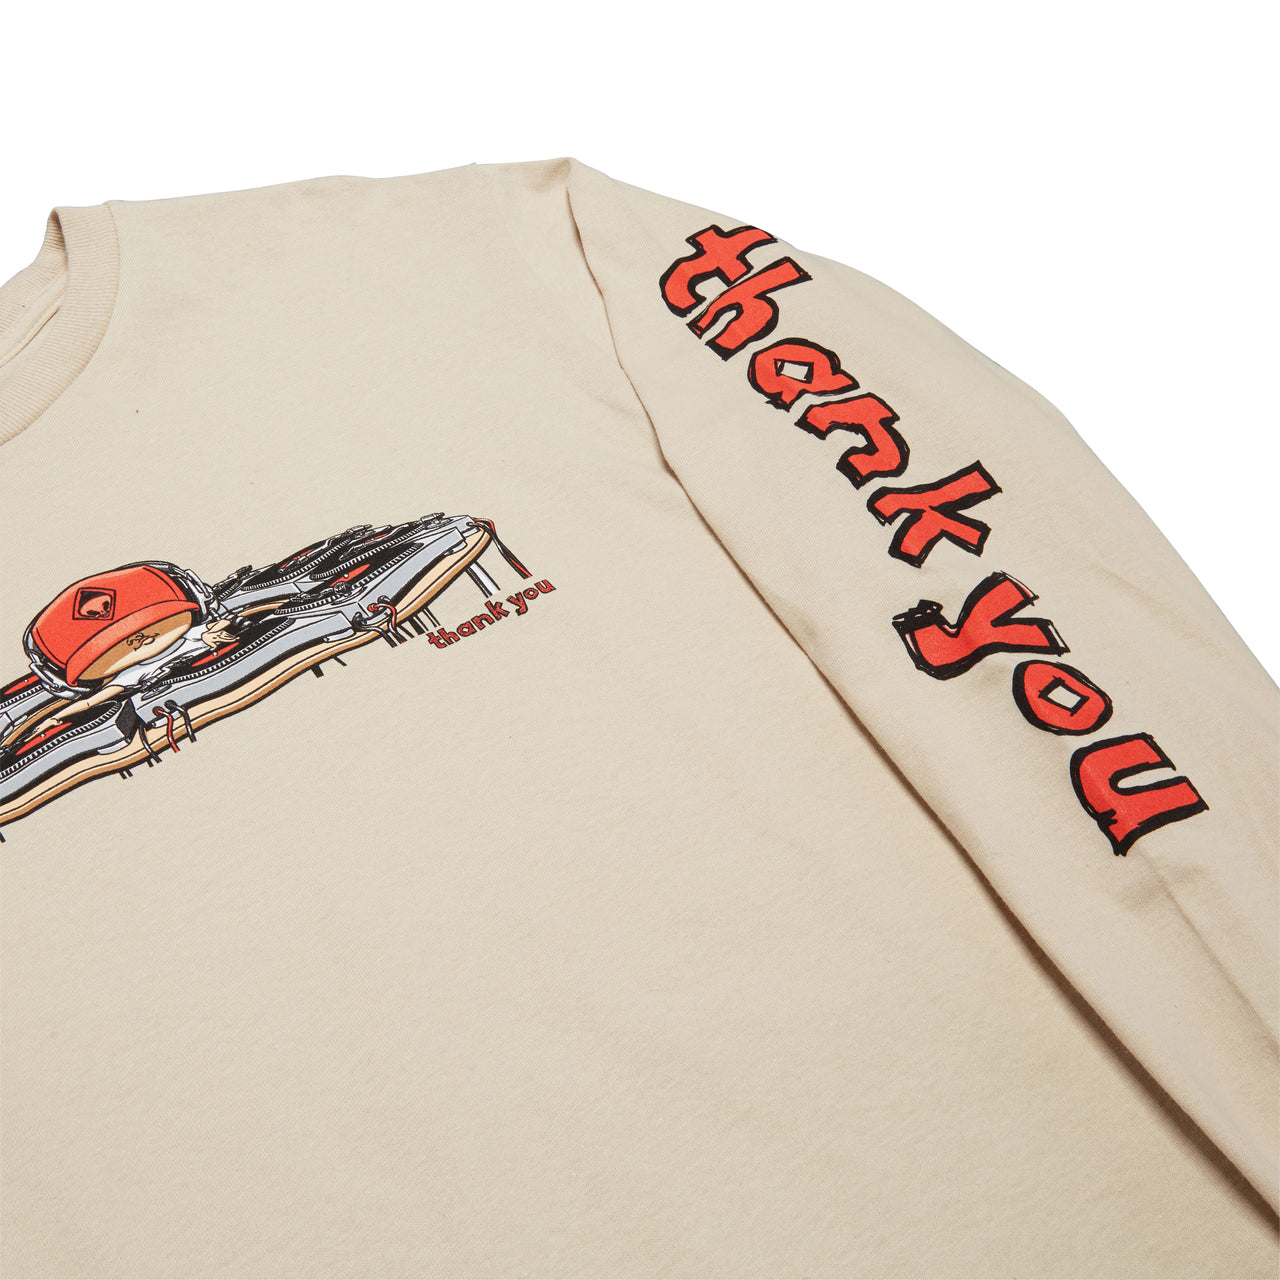 Thank You x Ronnie Creager Mix Master Long Sleeve T-Shirt - Cream image 2